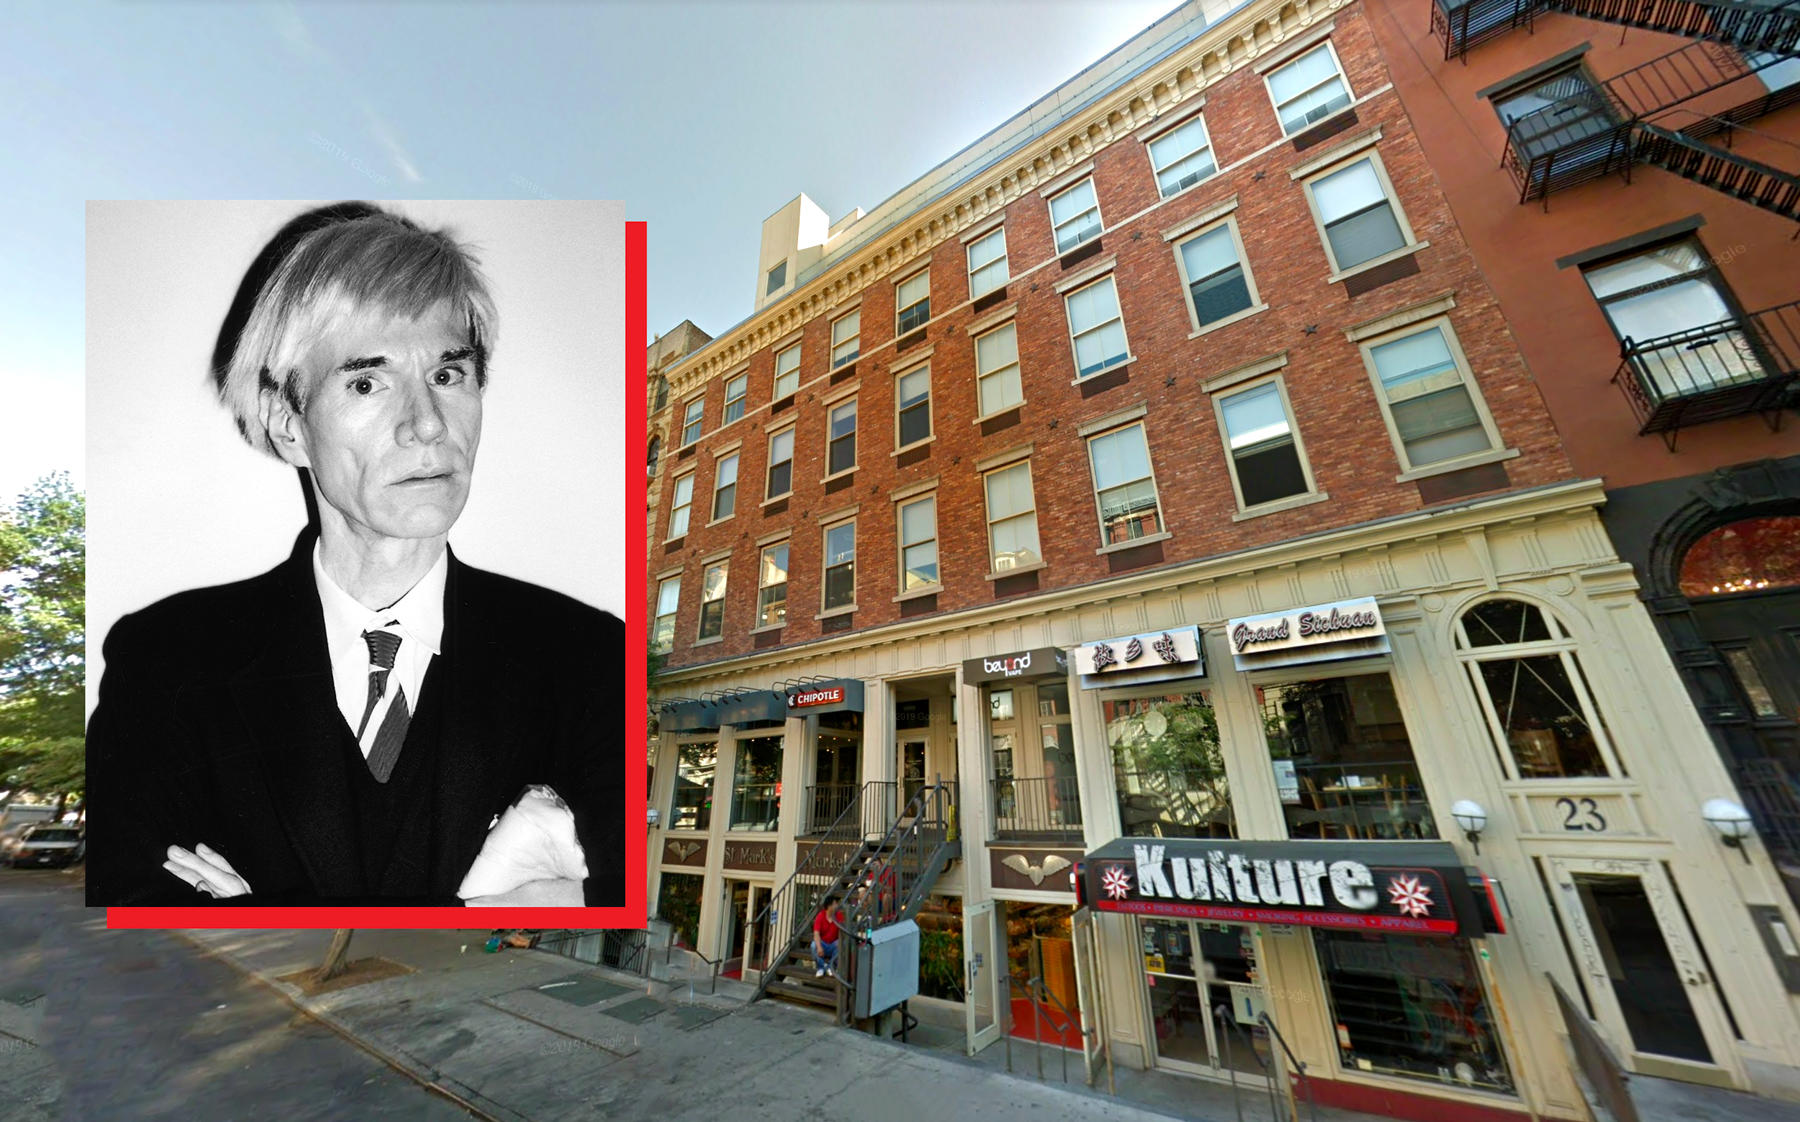 19-23 St. Mark’s Place with Andy Warhol (Credit: Google Maps; Warhol by Mark Sink / Corbis via Getty Images)